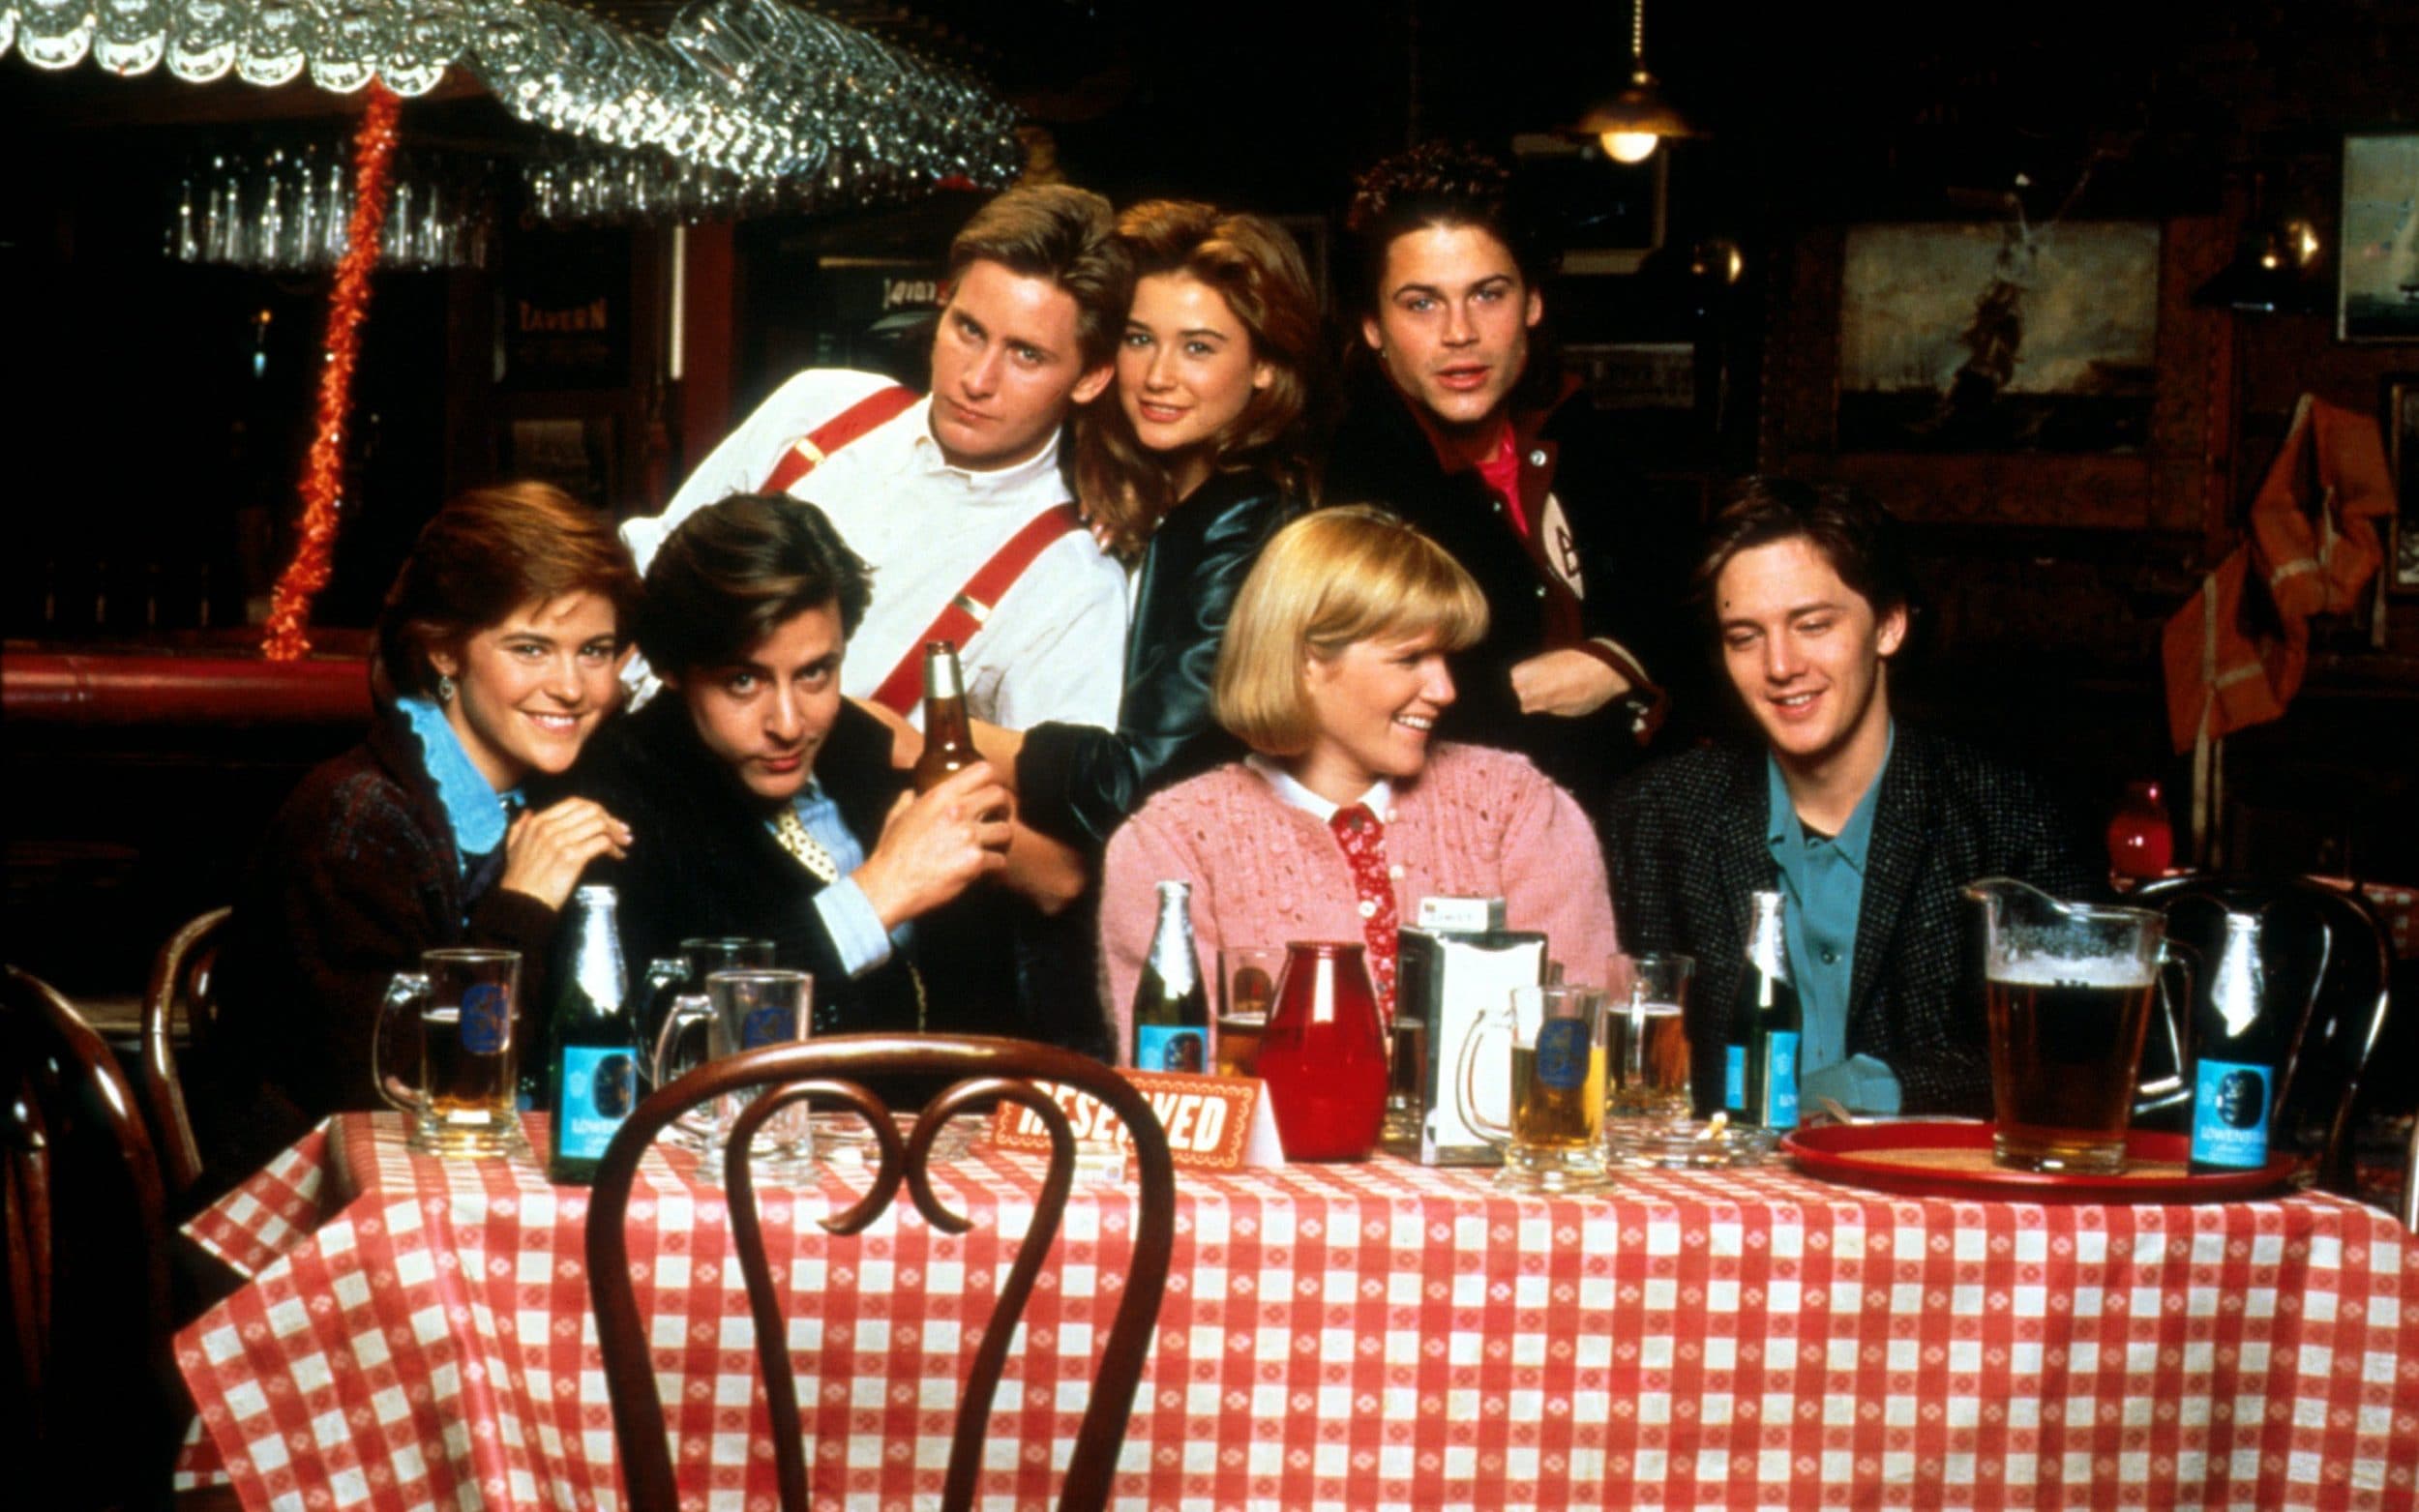 ‘The most loathsome human beings’: St Elmo’s Fire and the birth of the Brat Pack